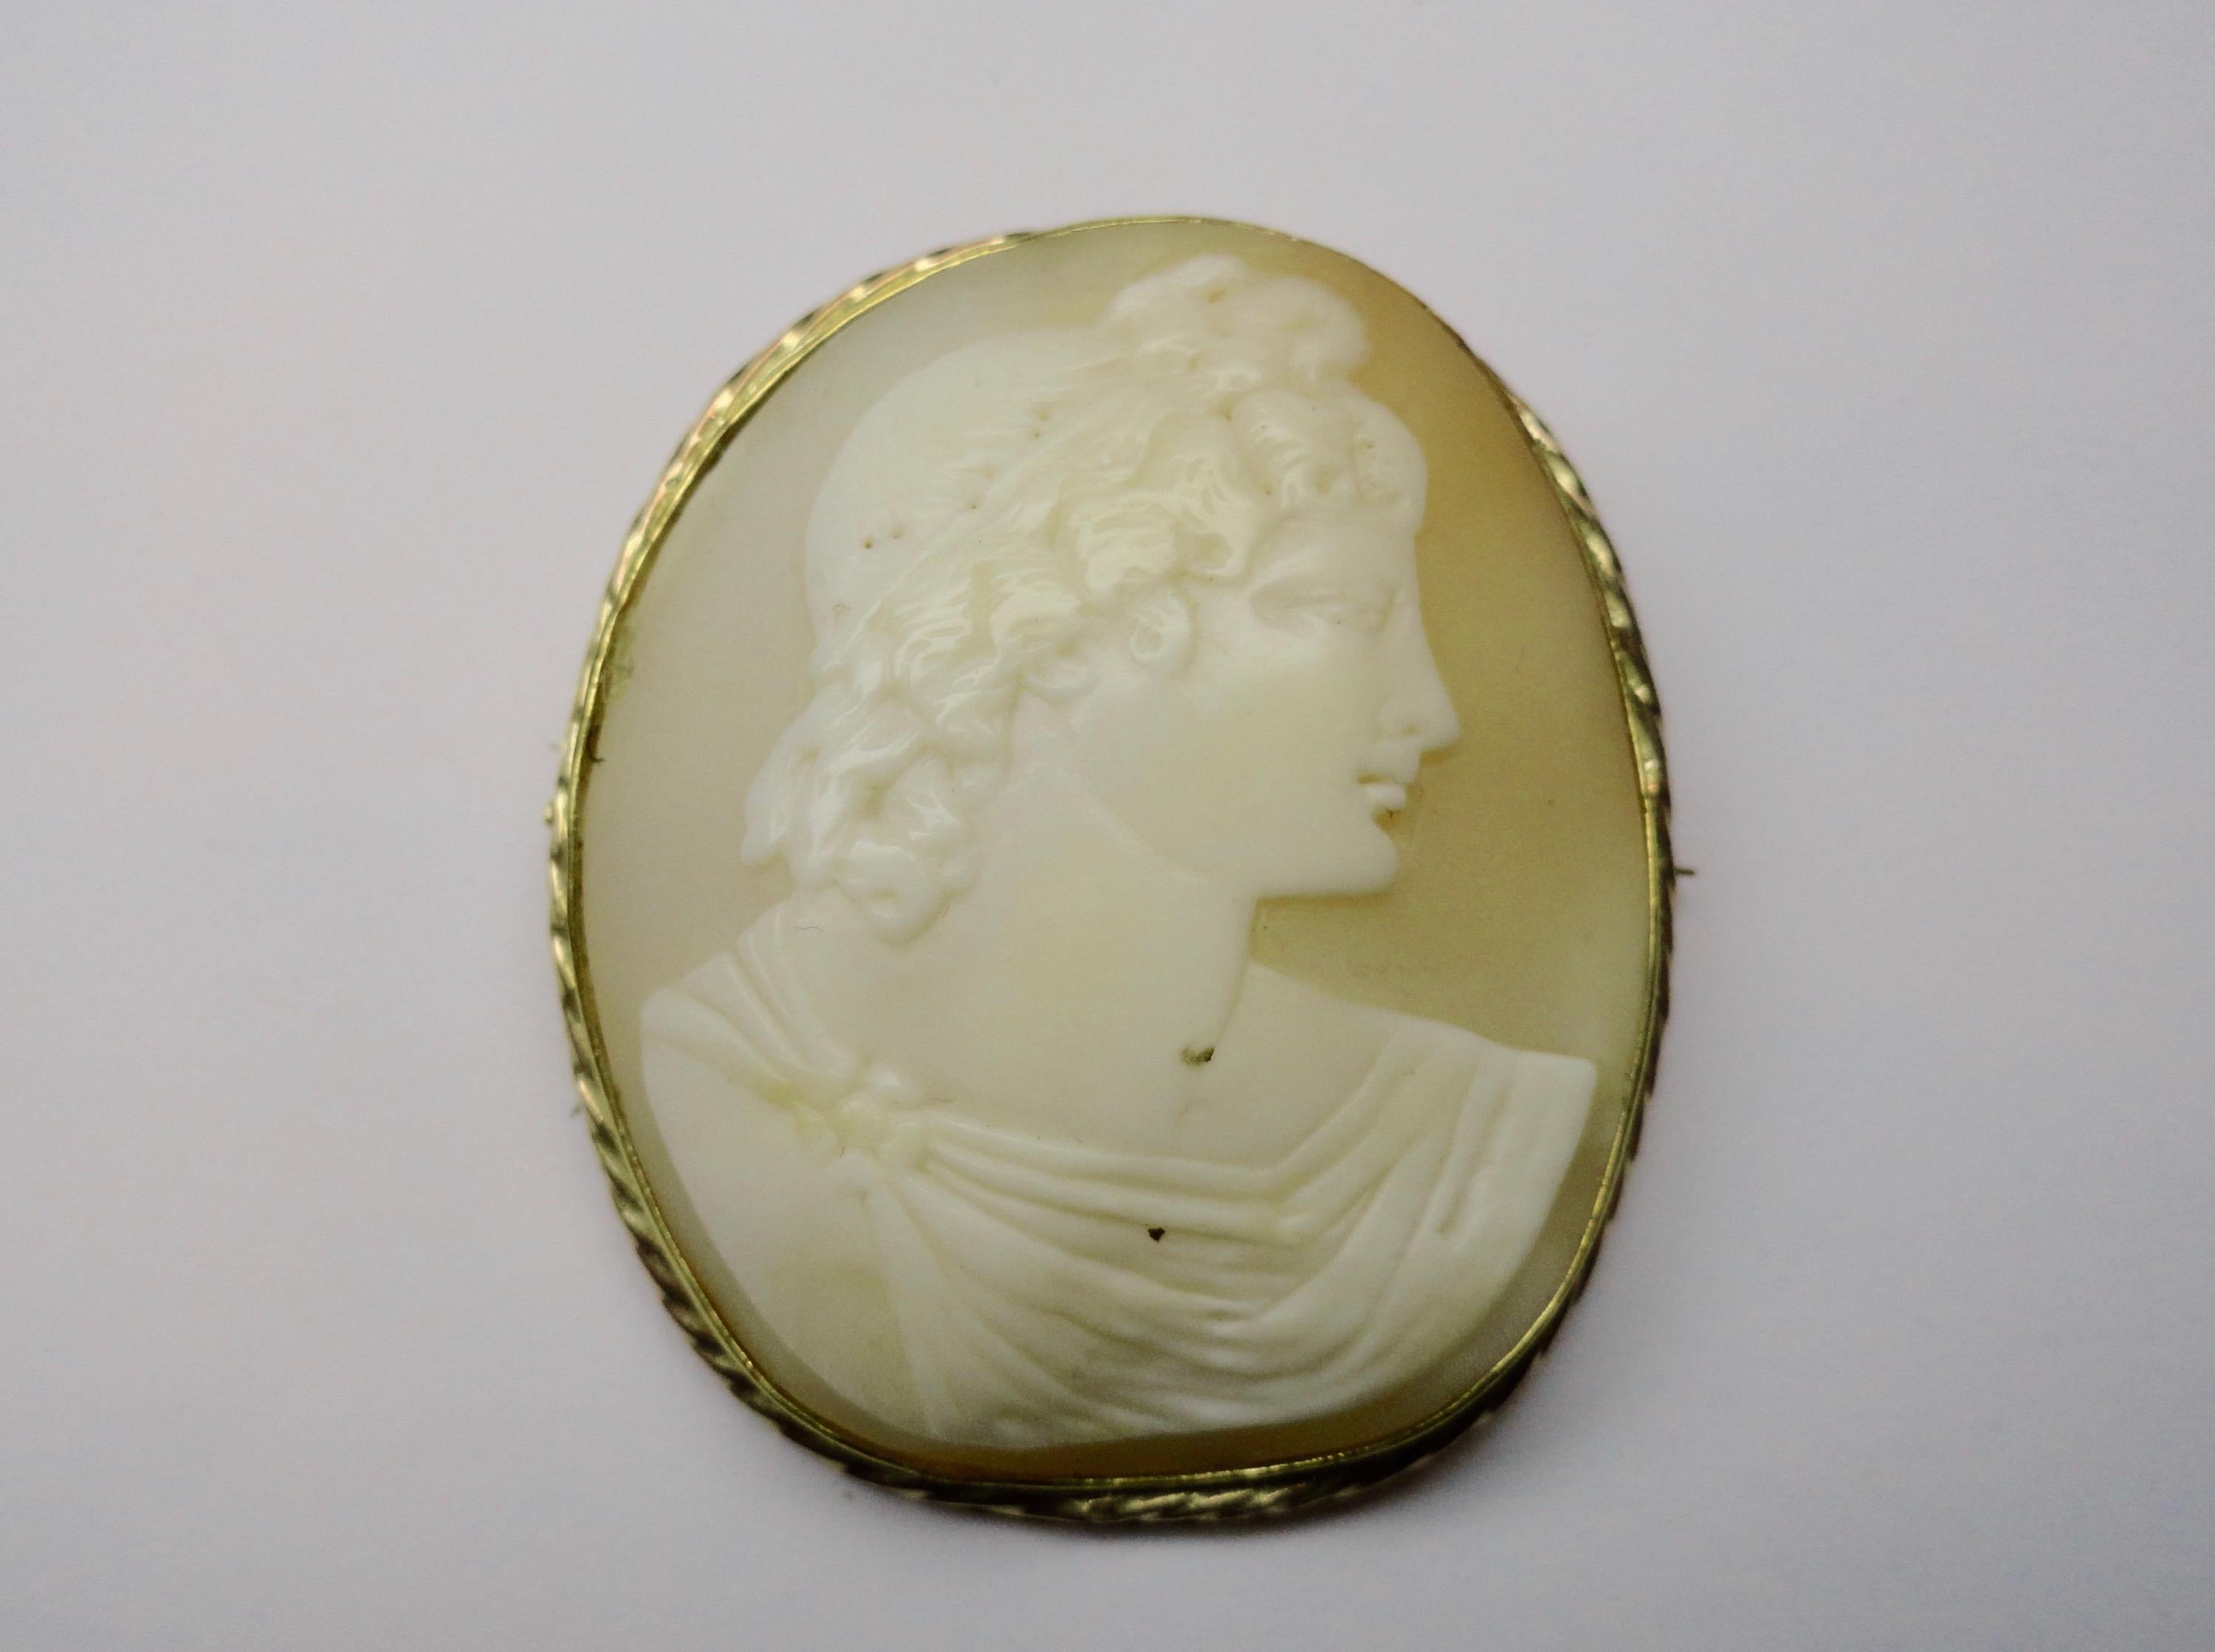 Antique shell cameo of very fine manufacture and particular subject depicting a classical male bust, with delicate gold setting. From the beginning of the 18th Century. 

Measurements: 4.7 cm in height and 4 cm in width